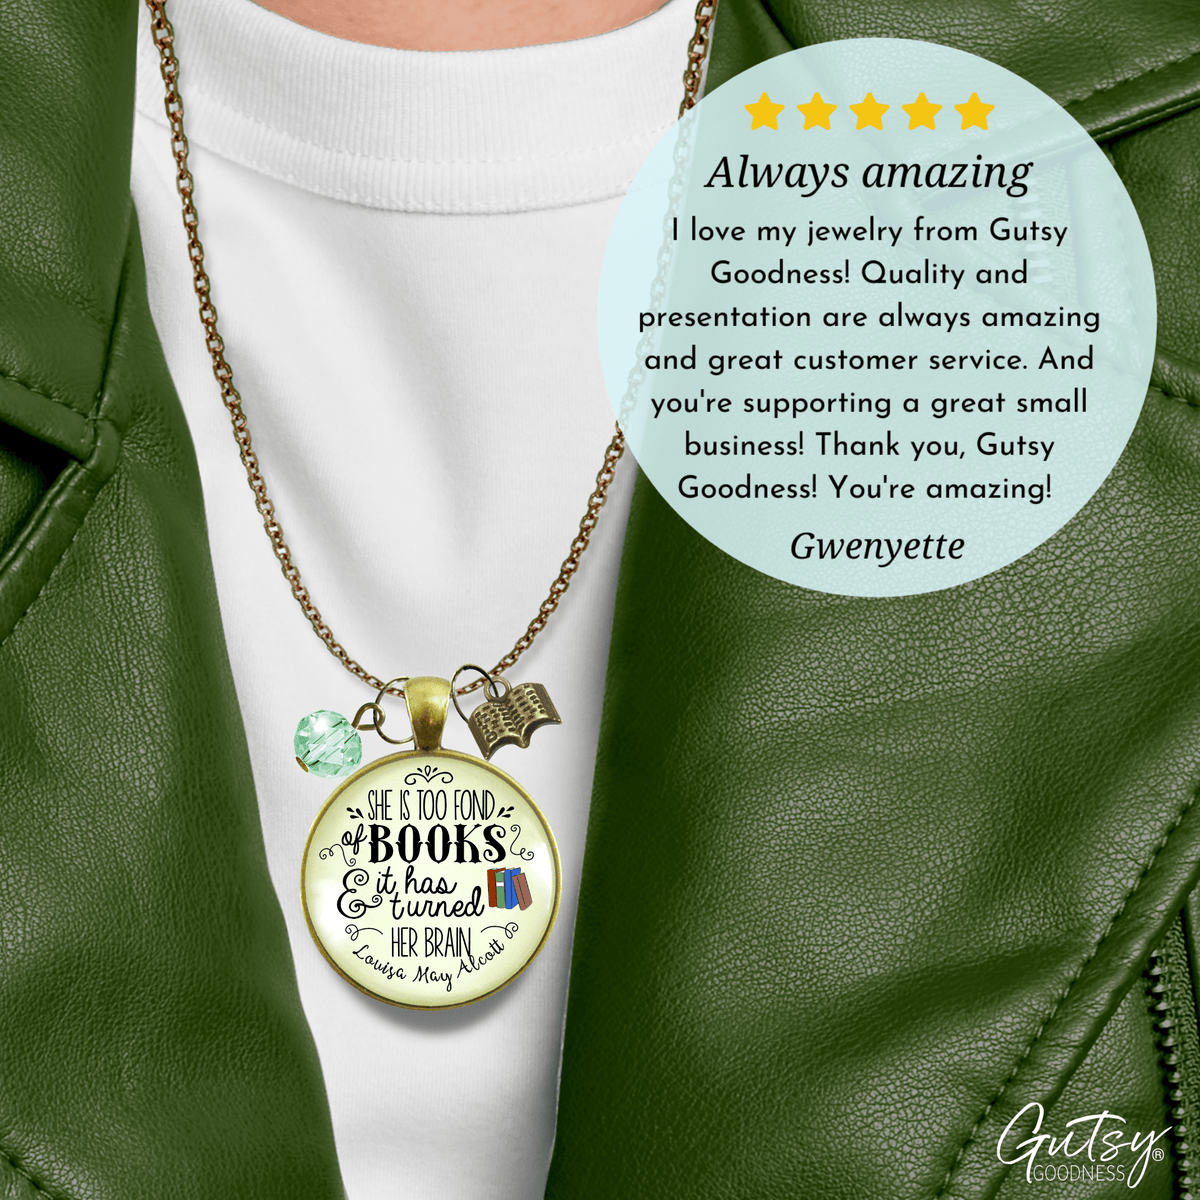 Book Necklace She Is Too Fond Literary Quote Louisa May Alcott Jewelry Green Charm - Gutsy Goodness Handmade Jewelry;Book Necklace She Is Too Fond Literary Quote Louisa May Alcott Jewelry Green Charm - Gutsy Goodness Handmade Jewelry Gifts